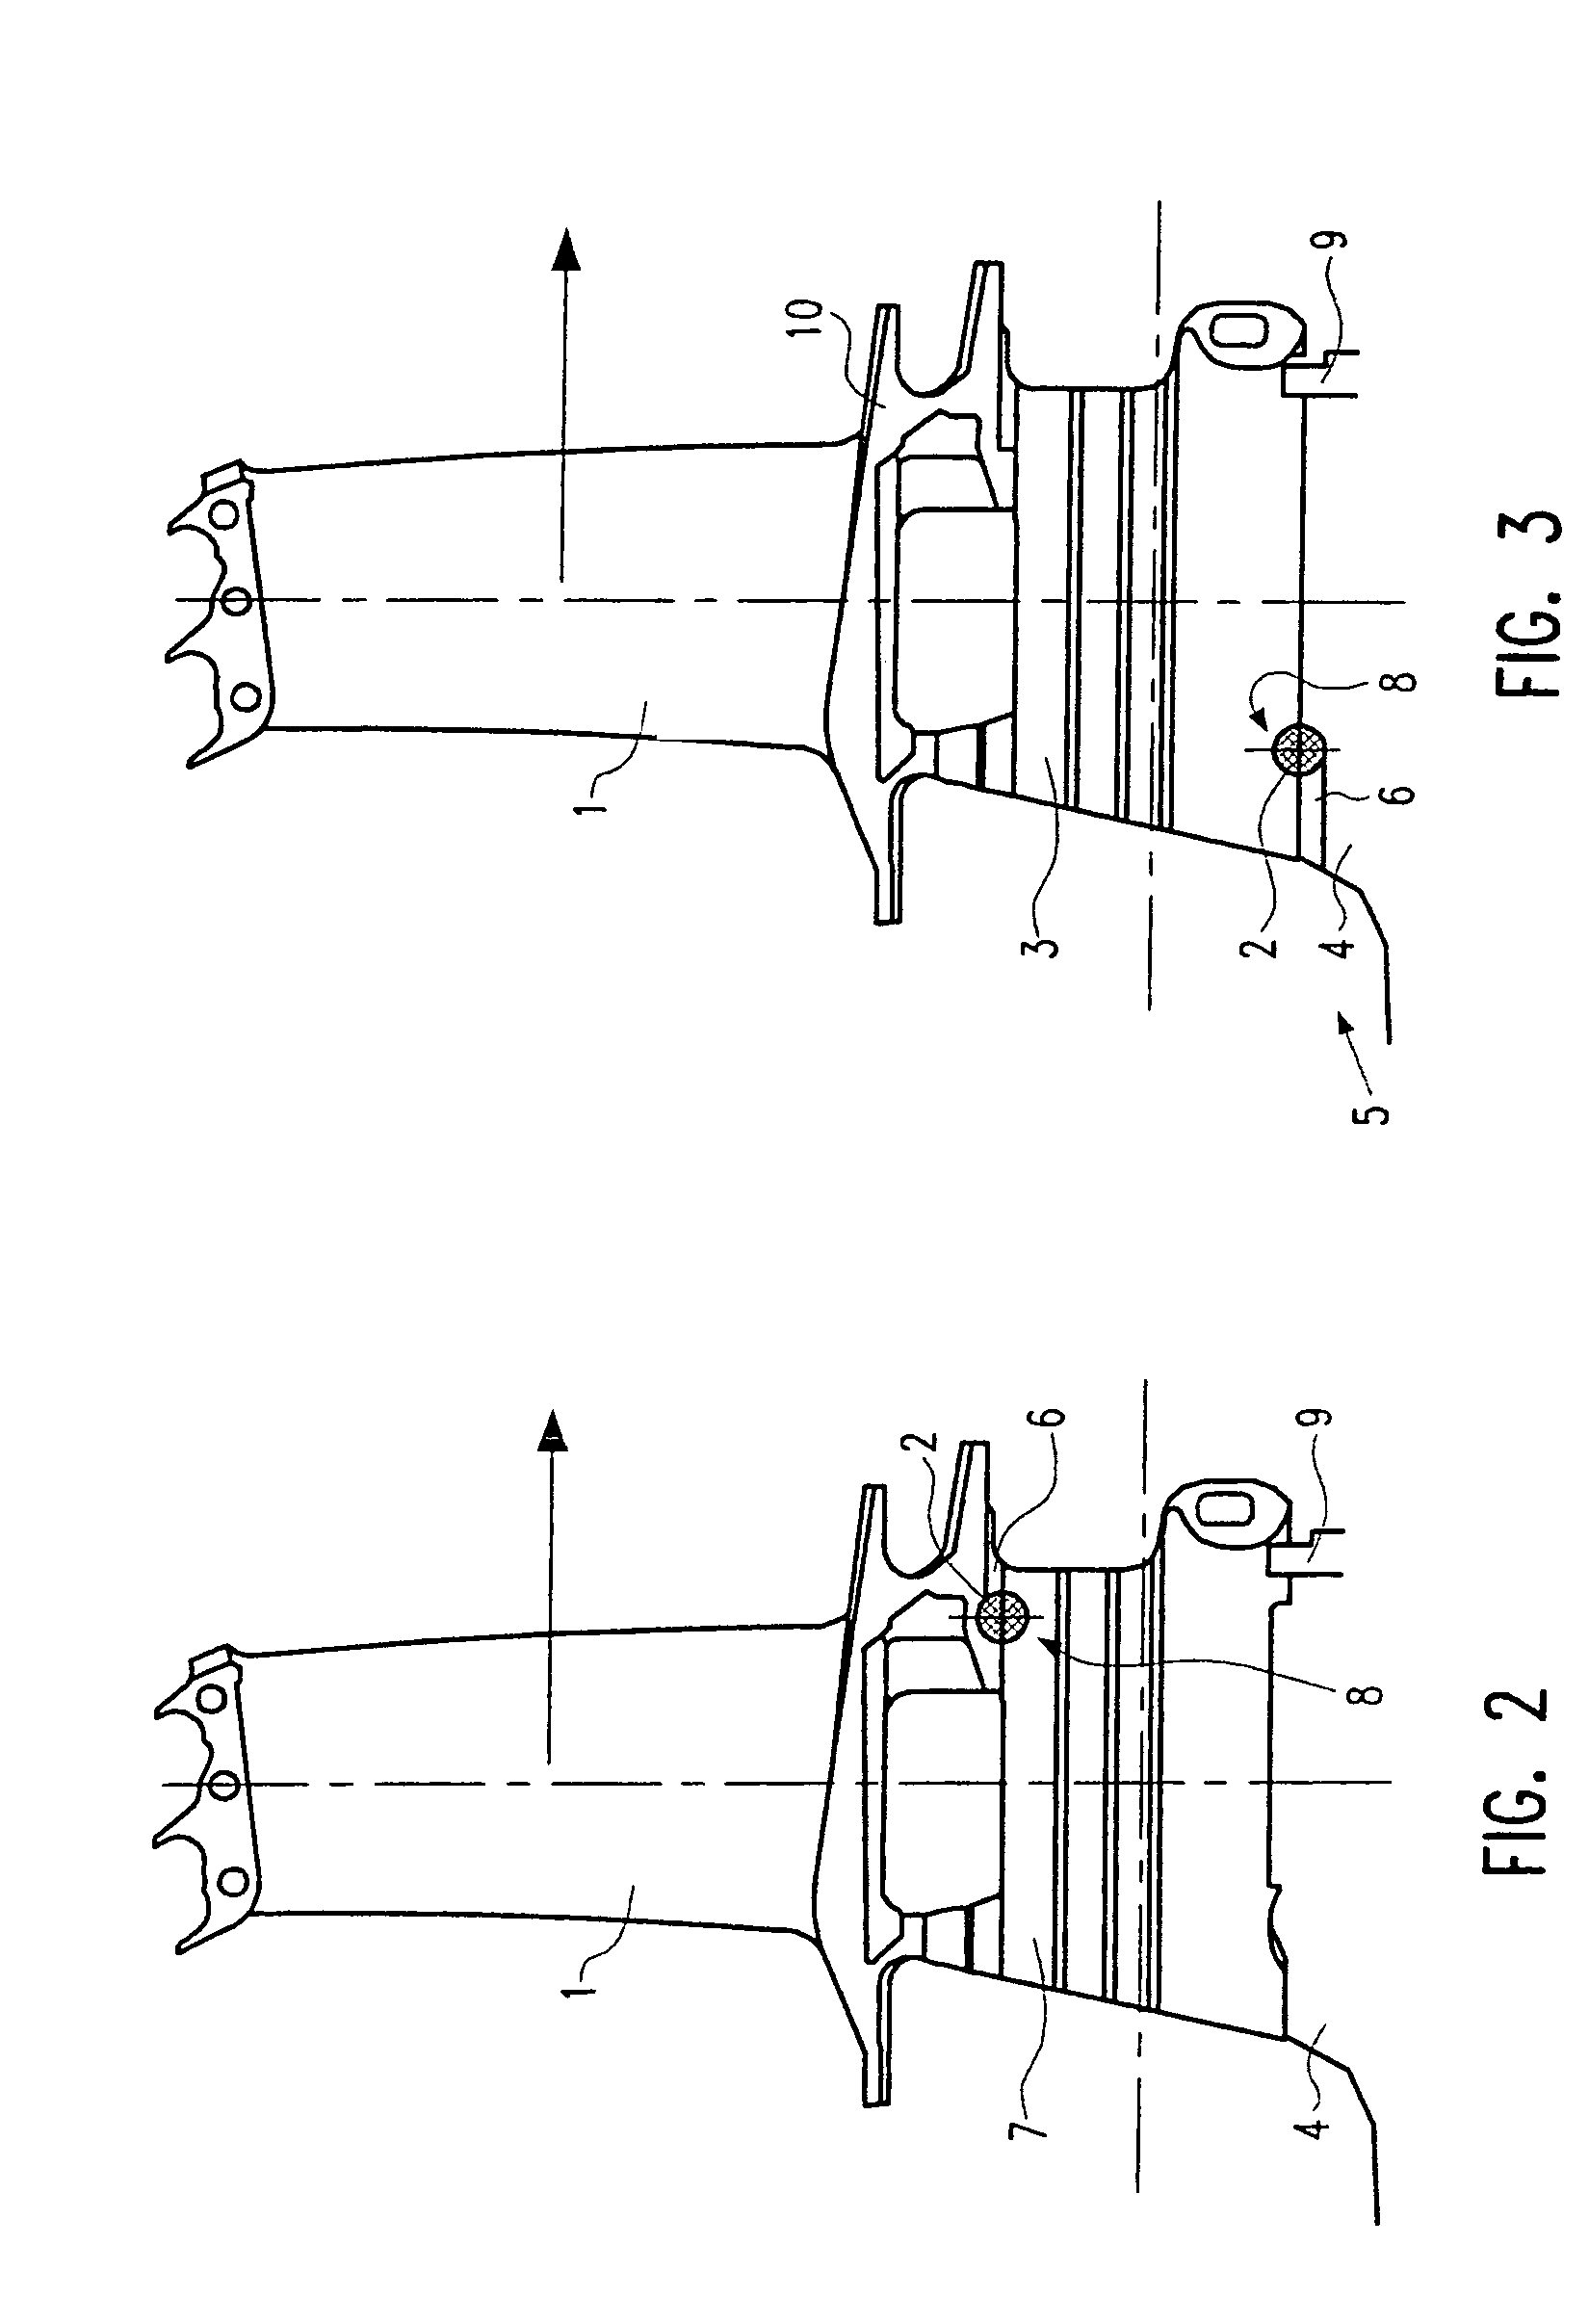 Axial locking device for turbine blades